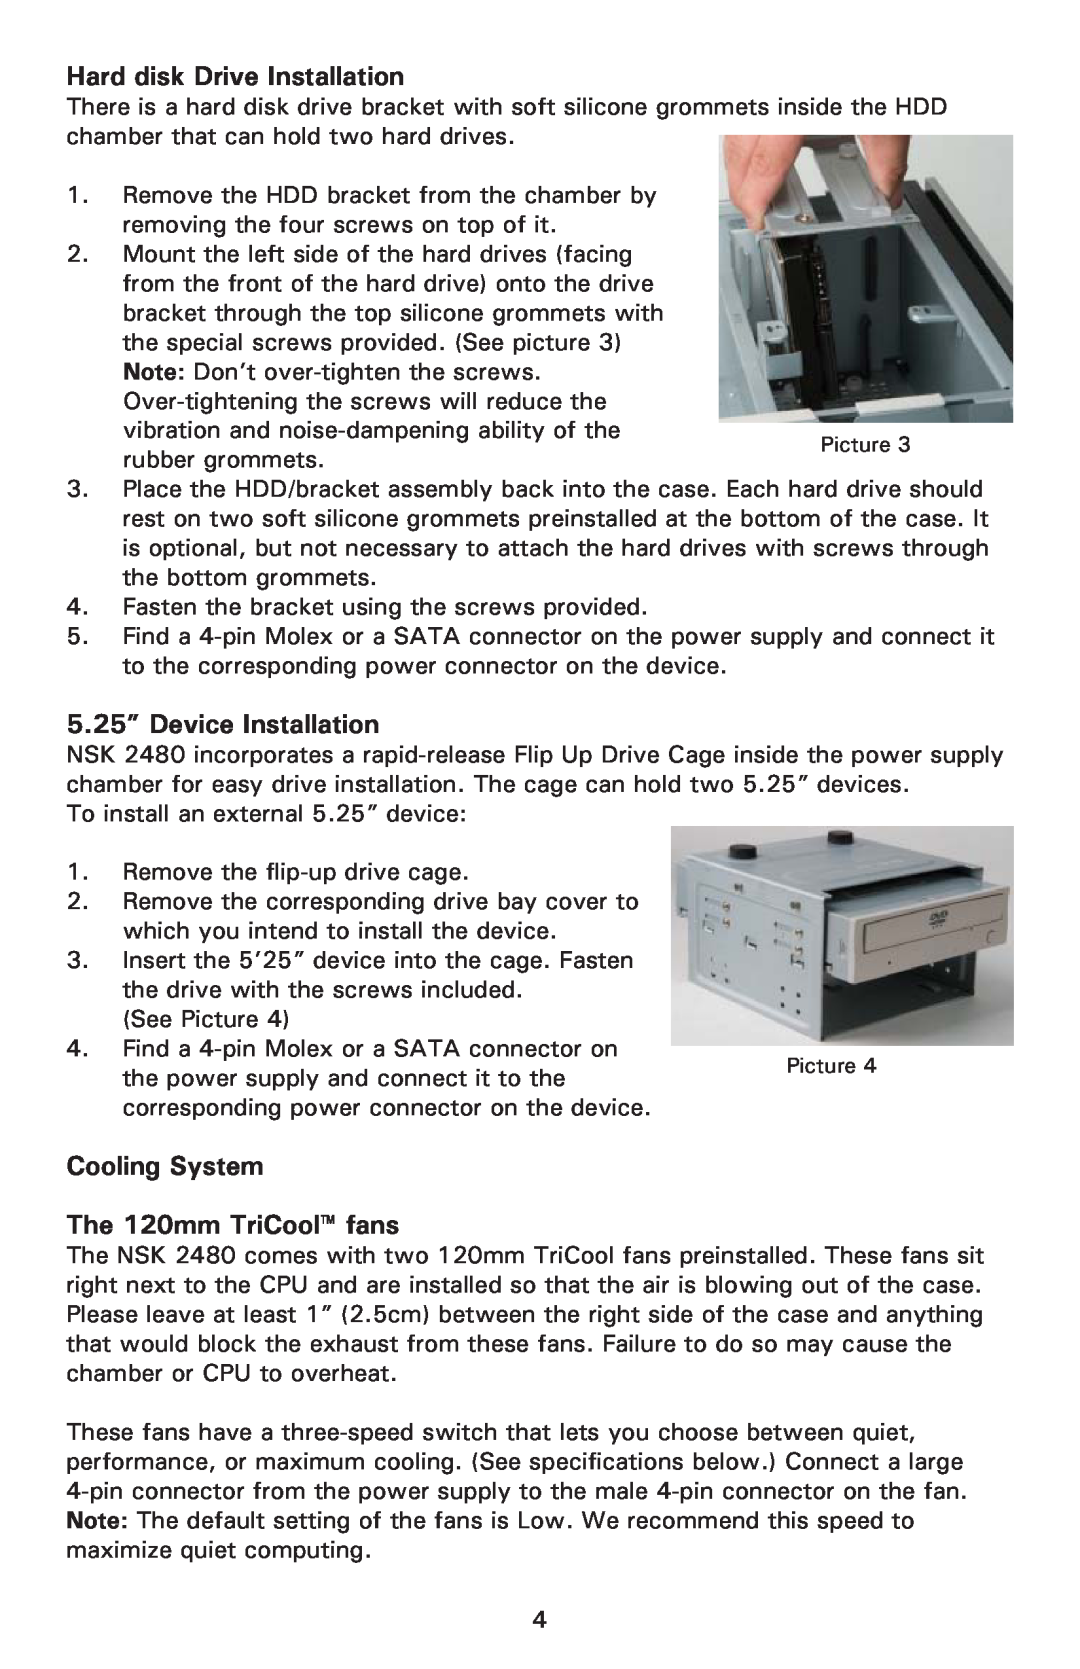 Antec NSK2480 user manual Hard disk Drive Installation, 5.25” Device Installation, Cooling System The 120mm TriCool fans 